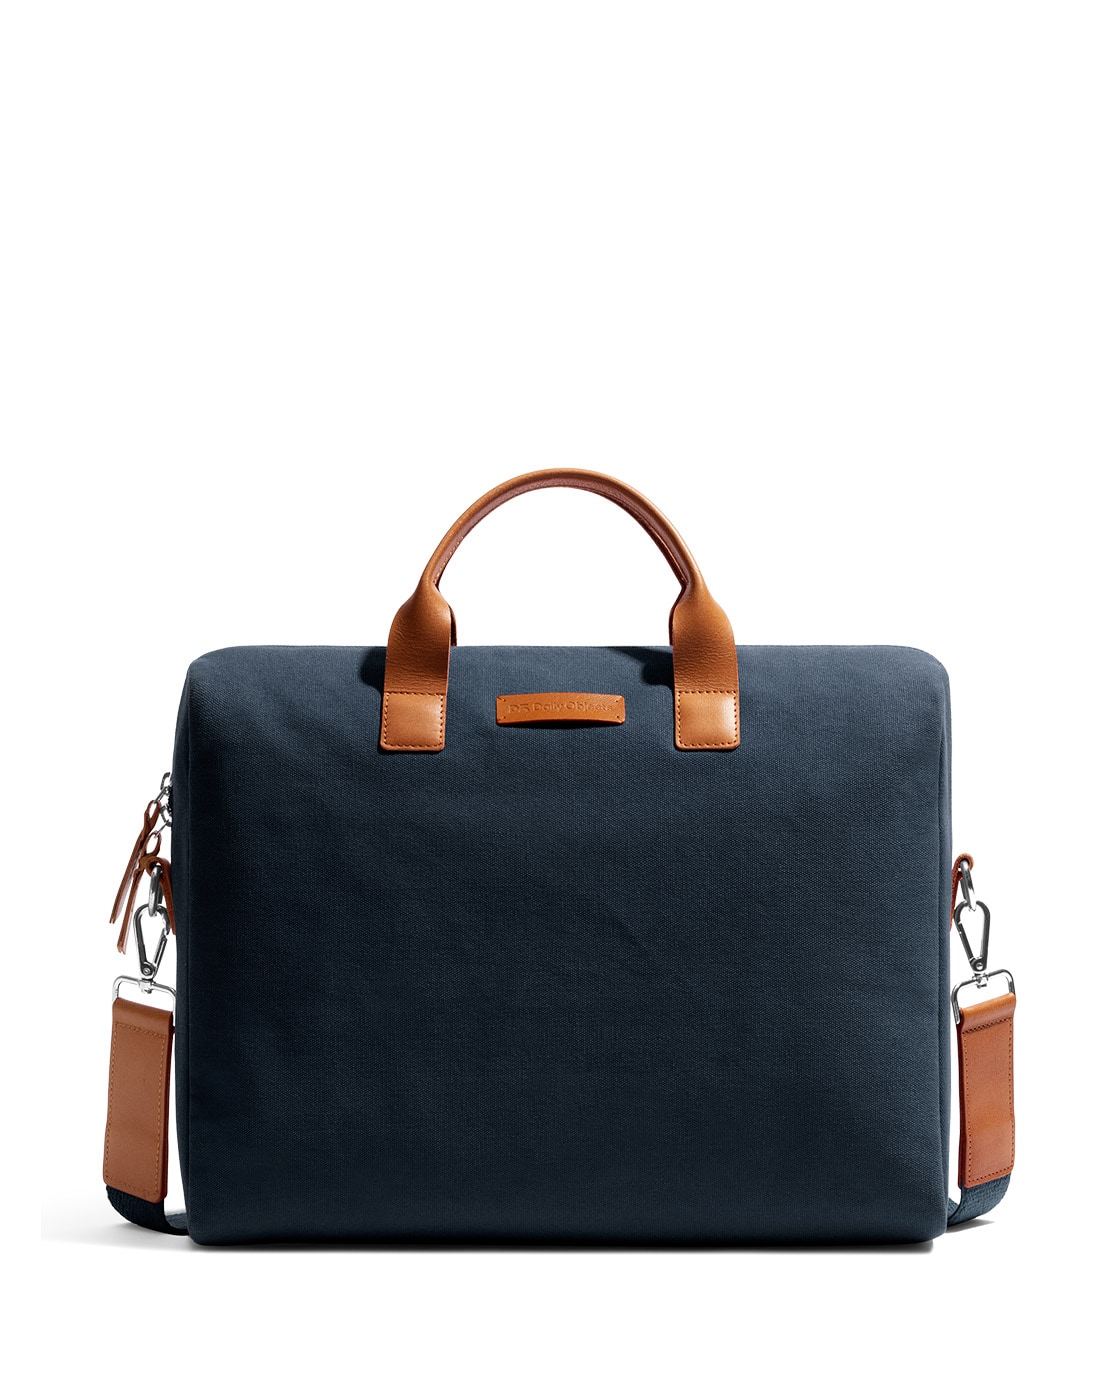 Stylish work bags for spring: Laptop totes, commuting backpacks and more -  Good Morning America